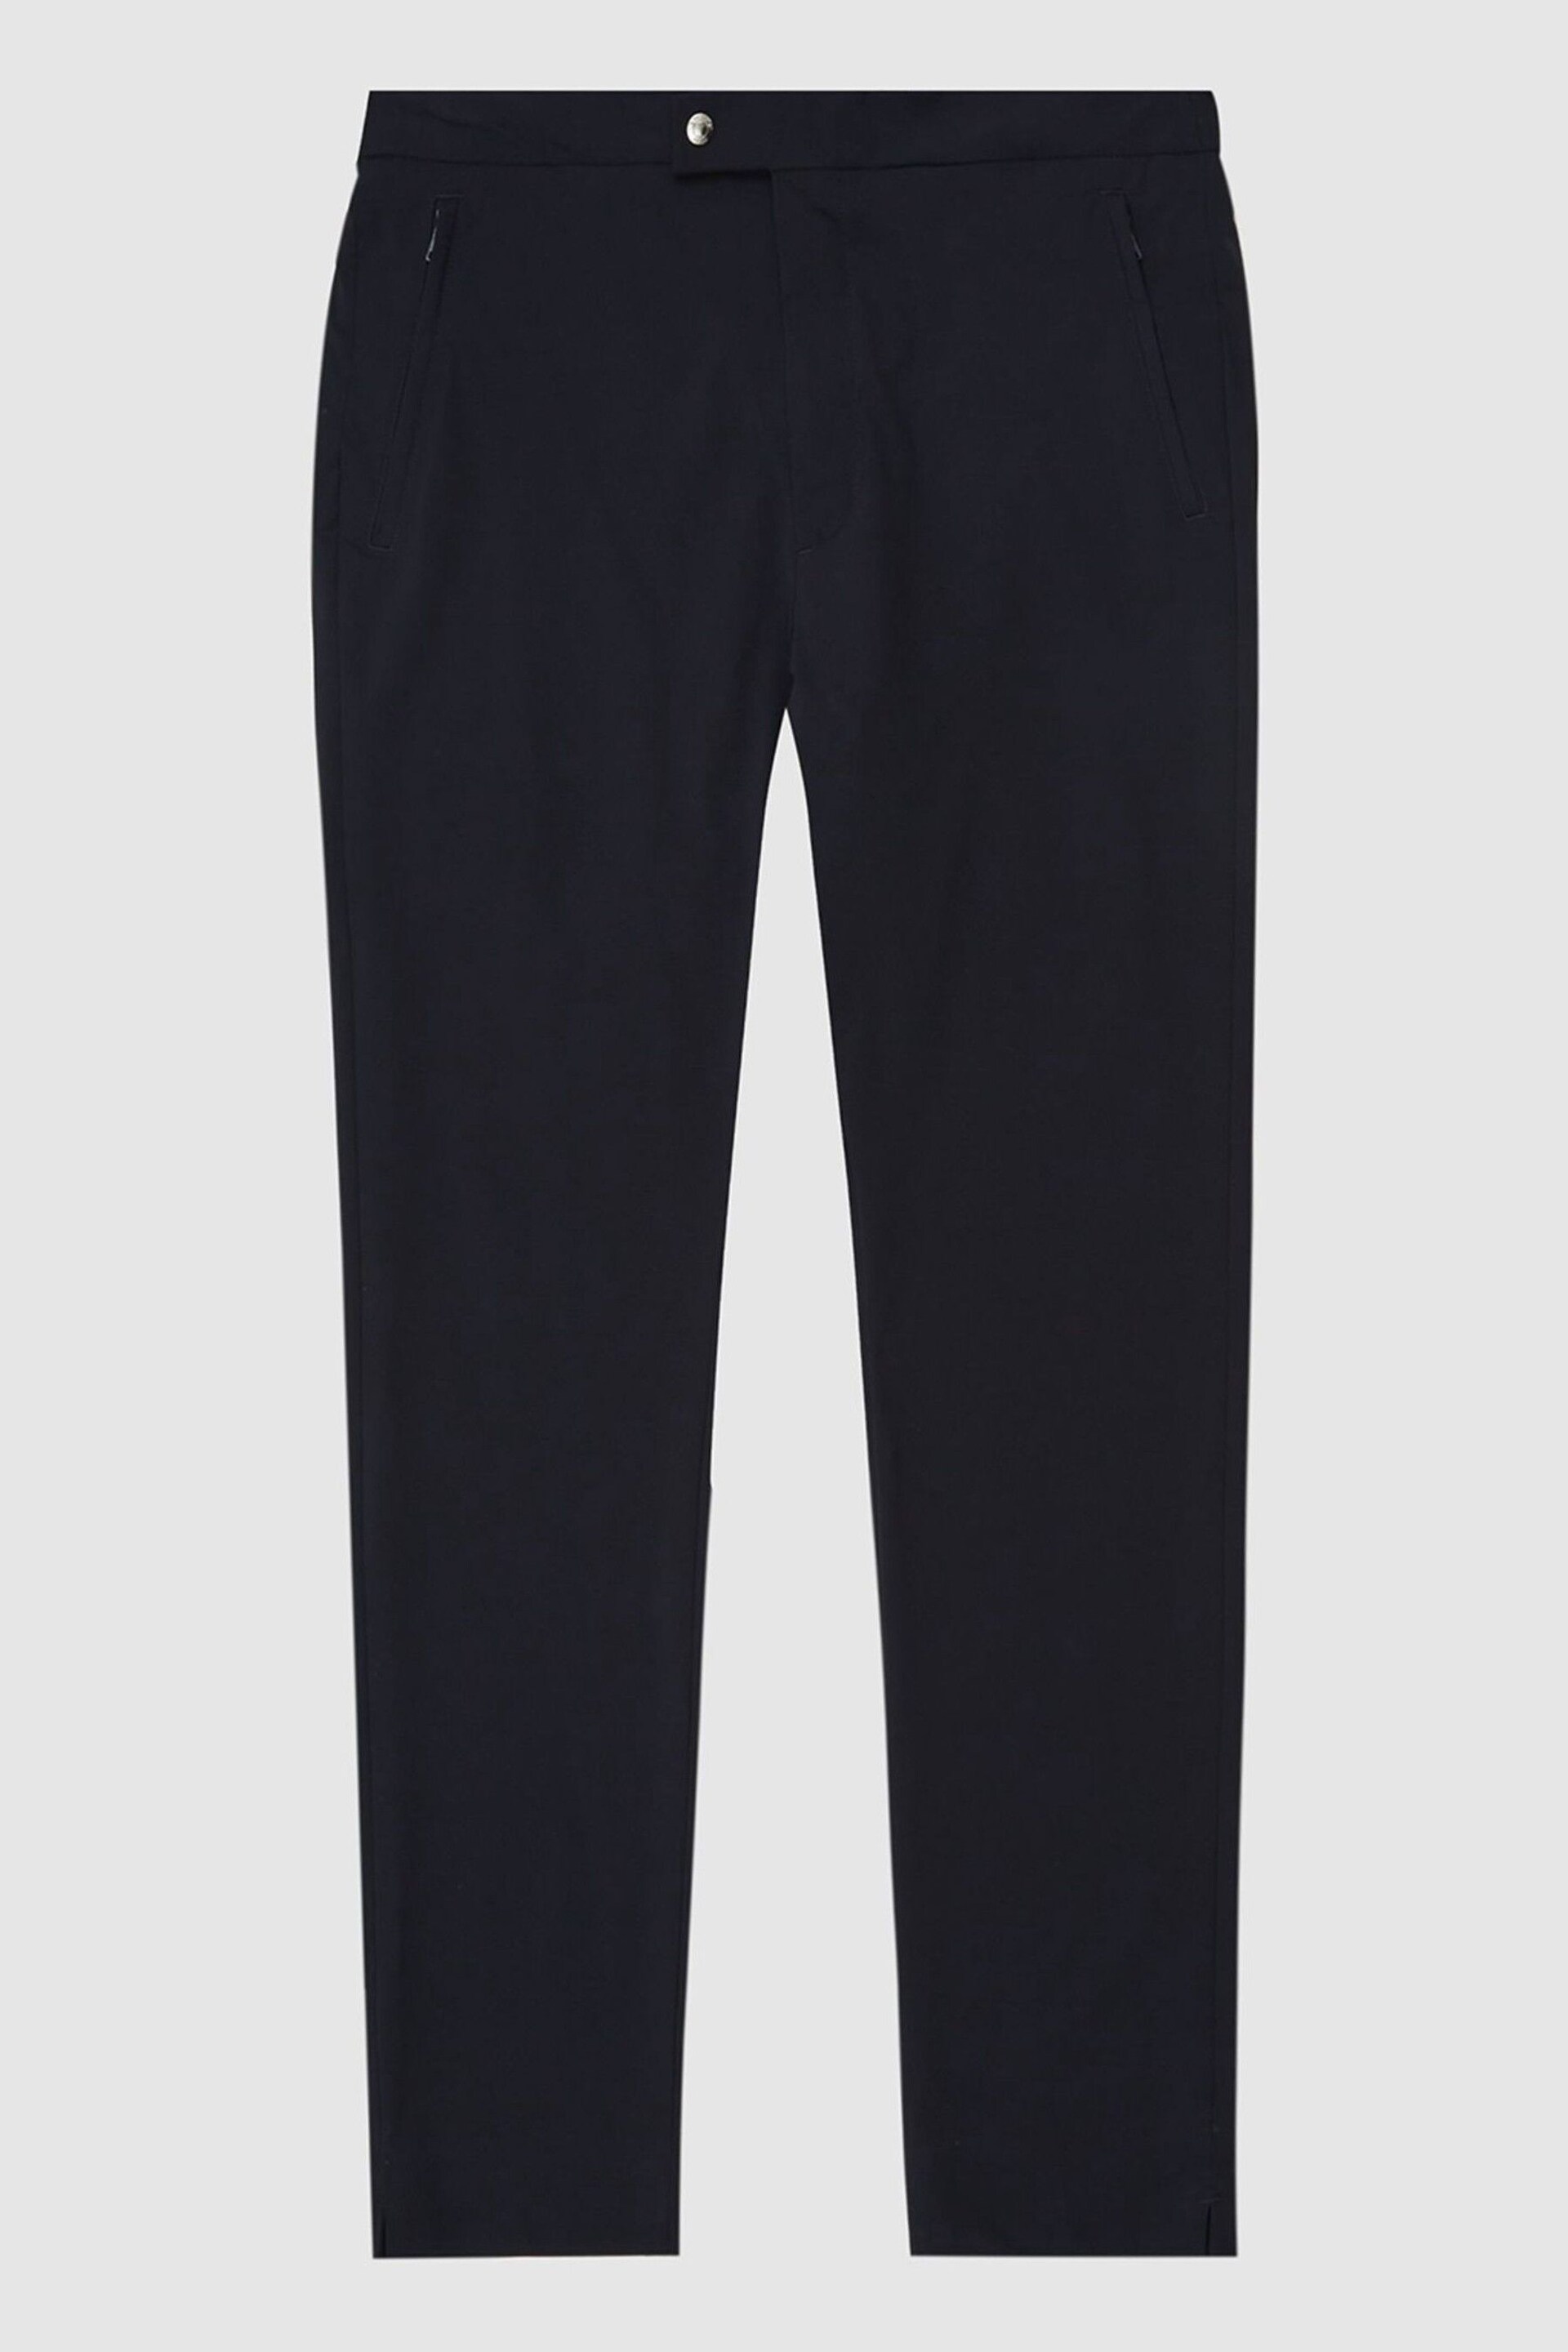 Reiss Navy Ranger Golf Performance Slim Fit Trousers - Image 2 of 5